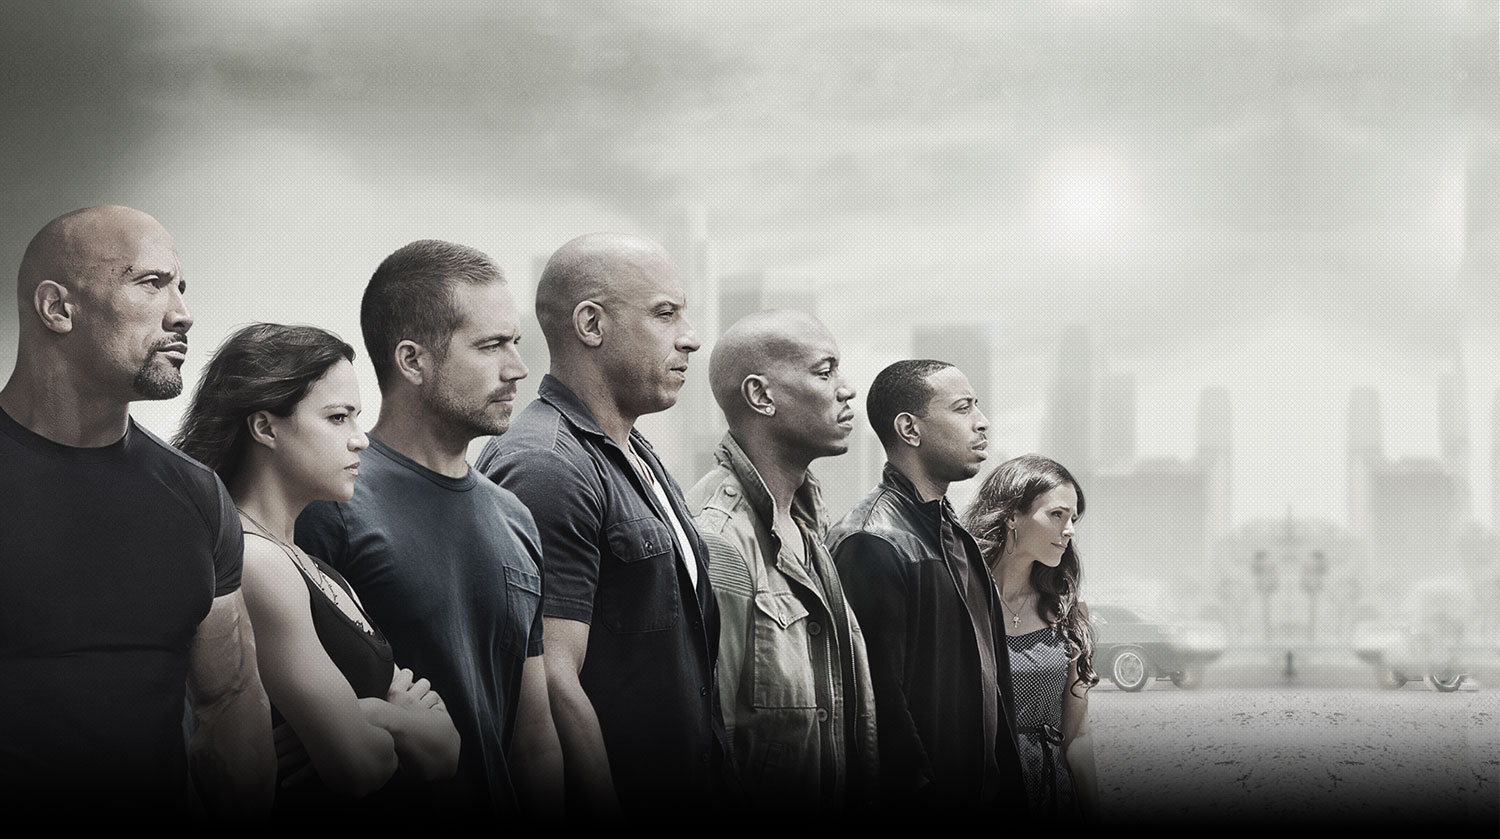 Furious 7 on Track to Become the Year's Biggest Box Office Success So Far